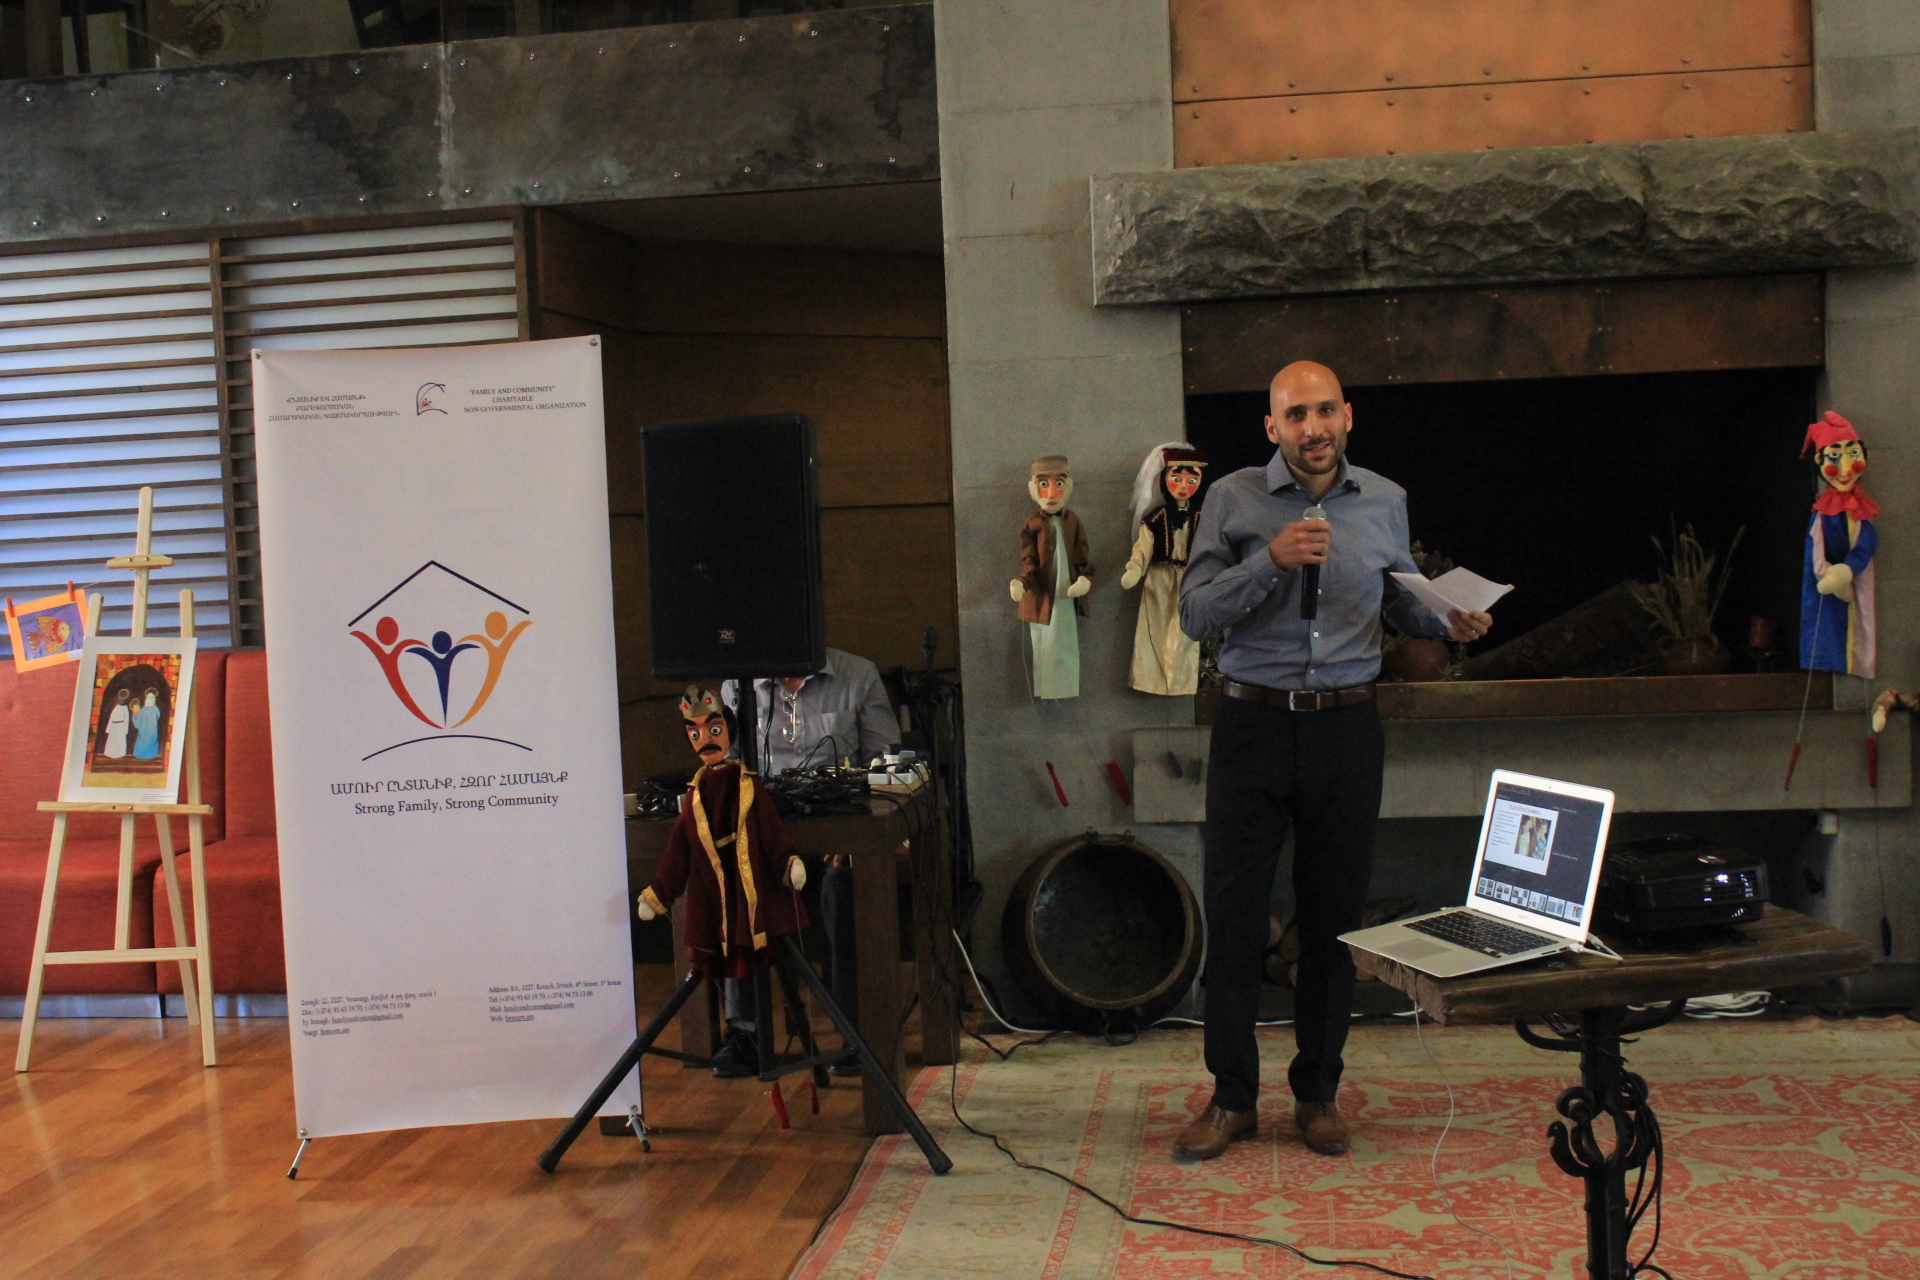 4.	Rupen Janbazian of the Tufenkian Foundation welcomes guests and shares remarks on behalf of the Foundation. 